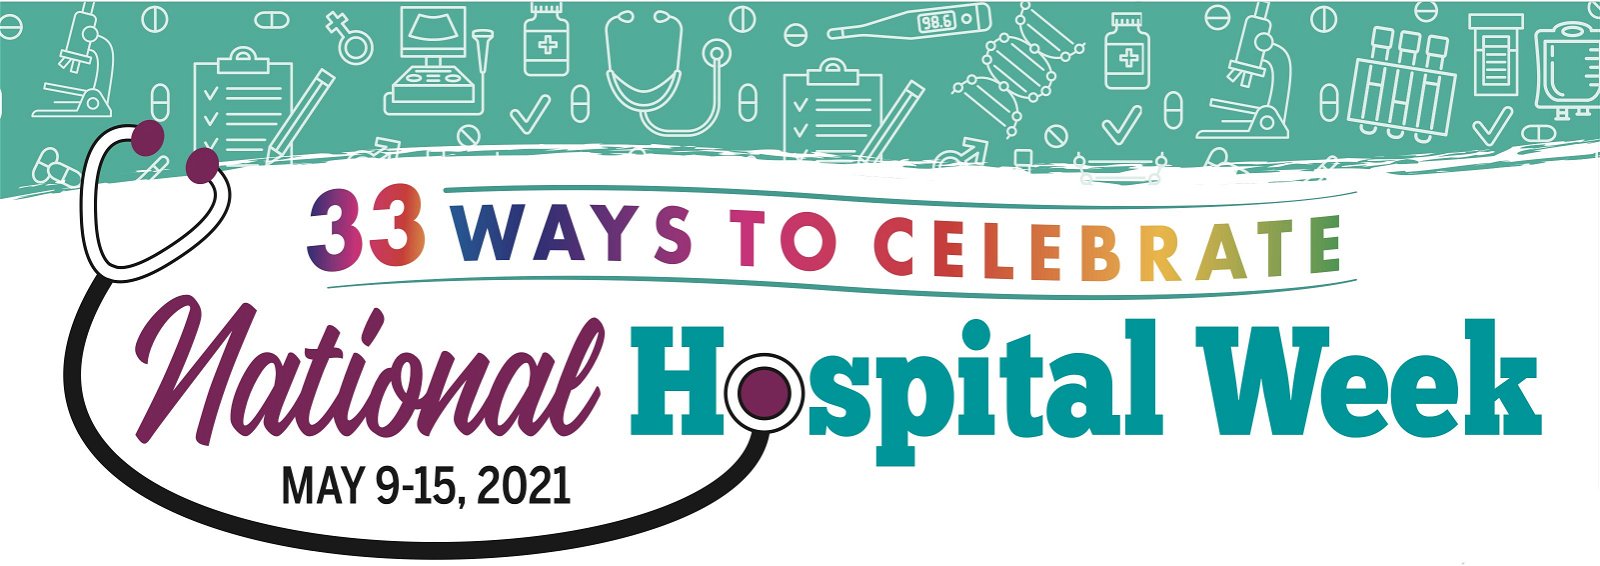 Positive Promotions Download Our 33 Ways To Celebrate National Hospital Week Guide! Milled